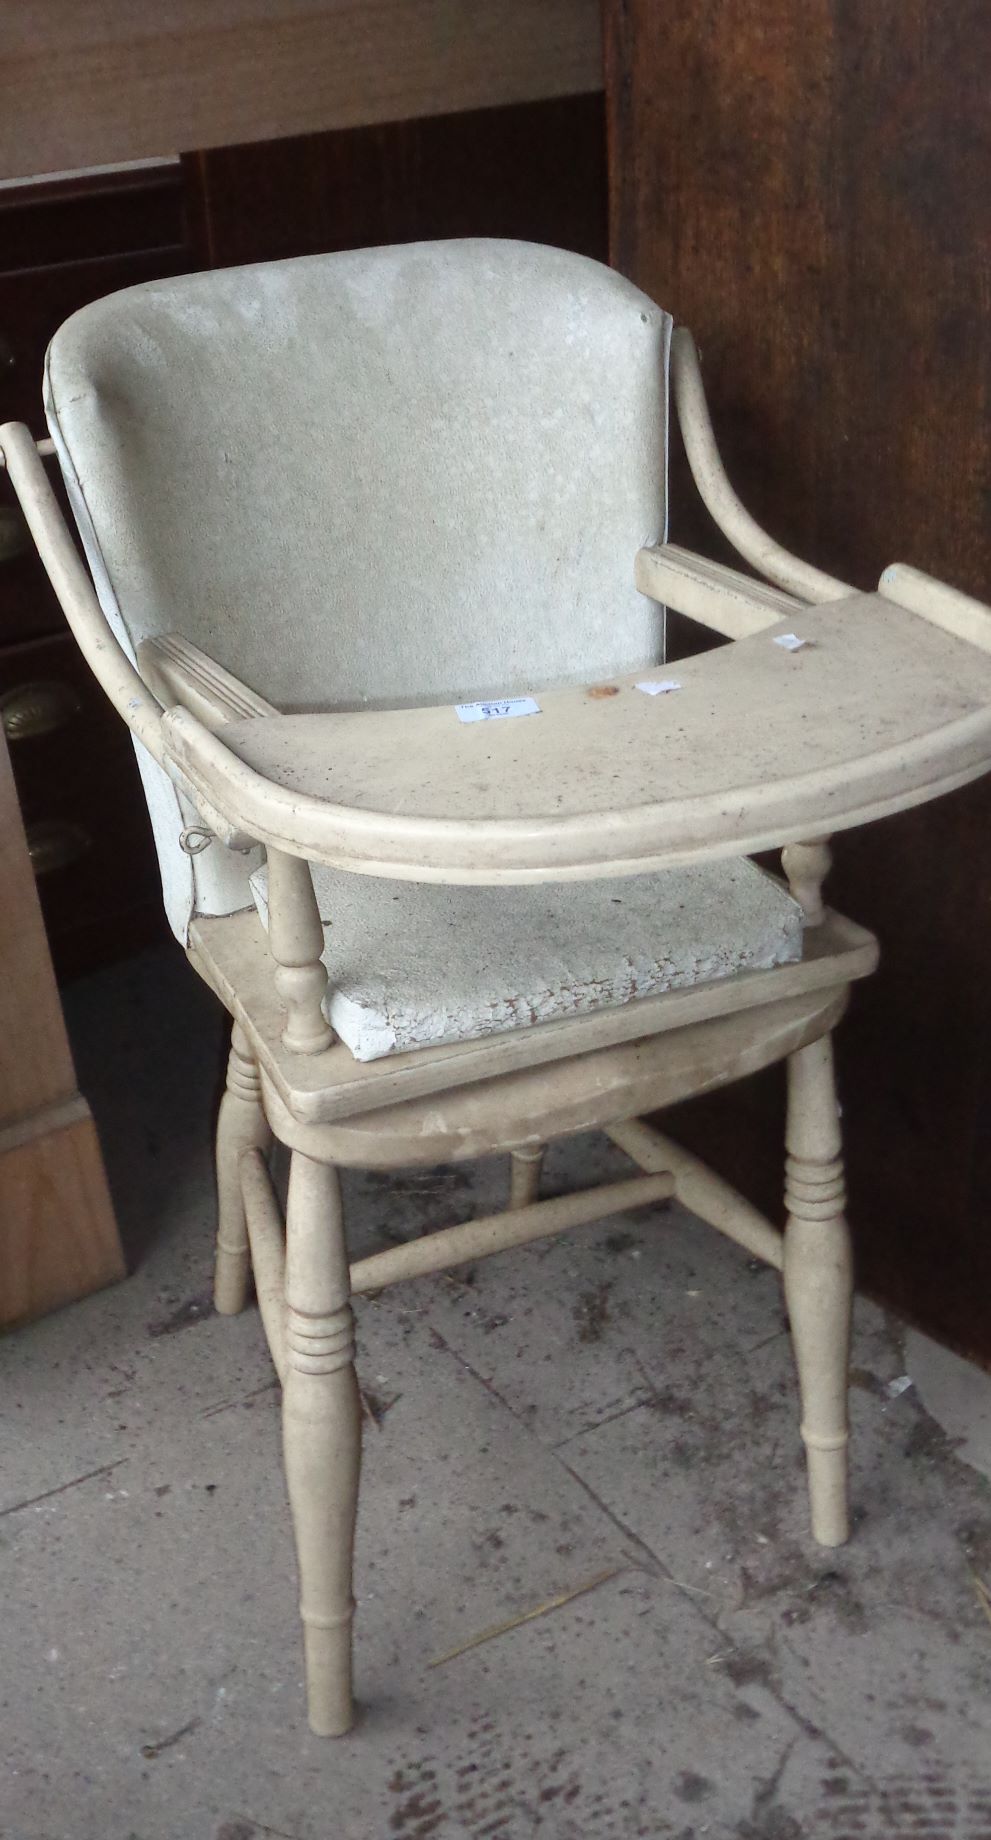 Child's highchair with drip tray